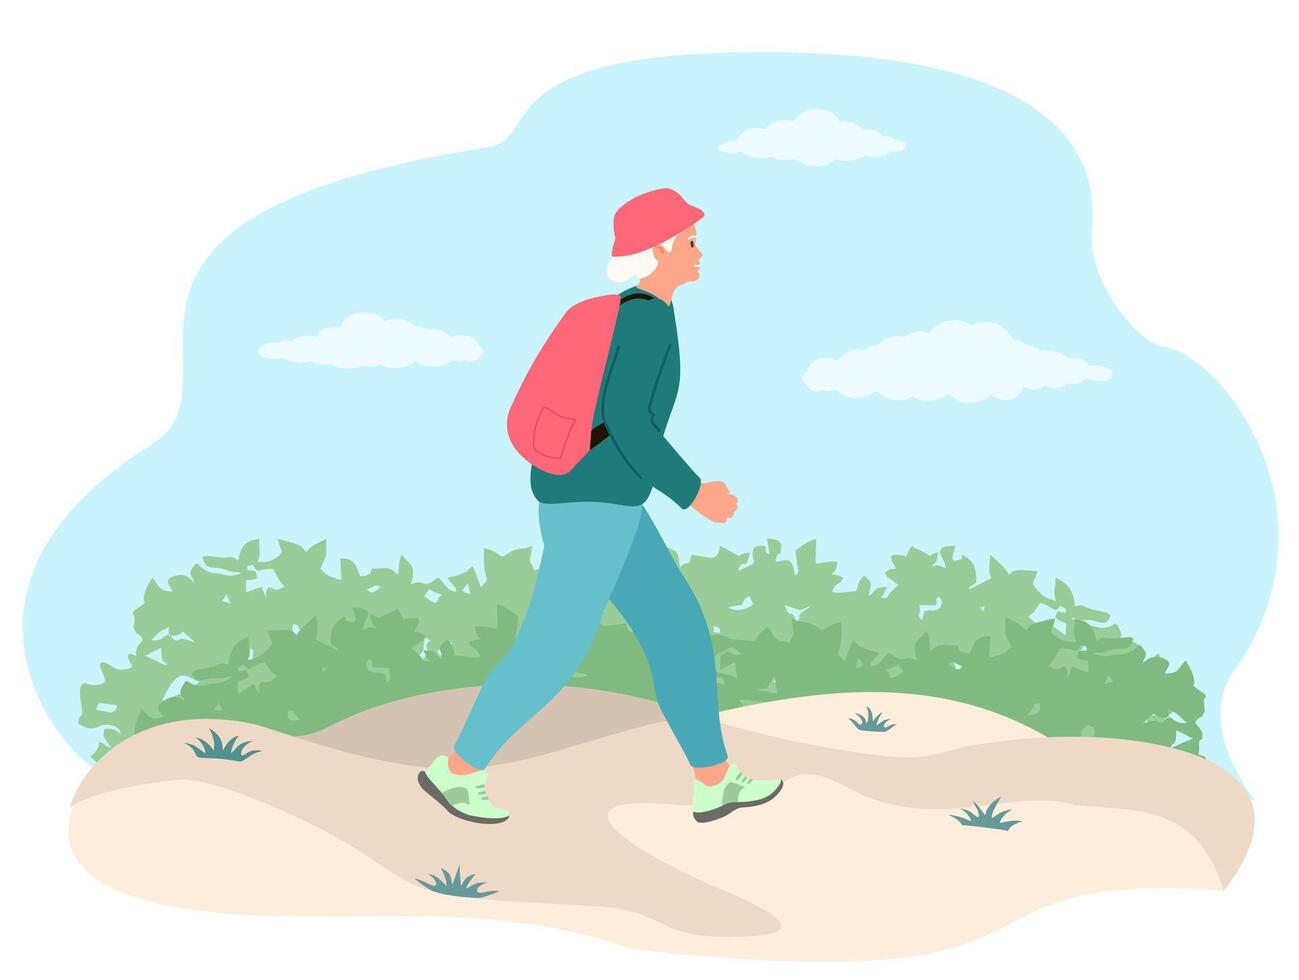 Elderly woman walking with backpack outdoors. Retired woman traveling actively. Hiking, trekking, healthy lifestyle, active ageing concept for banner, website design. Flat vector illustration.